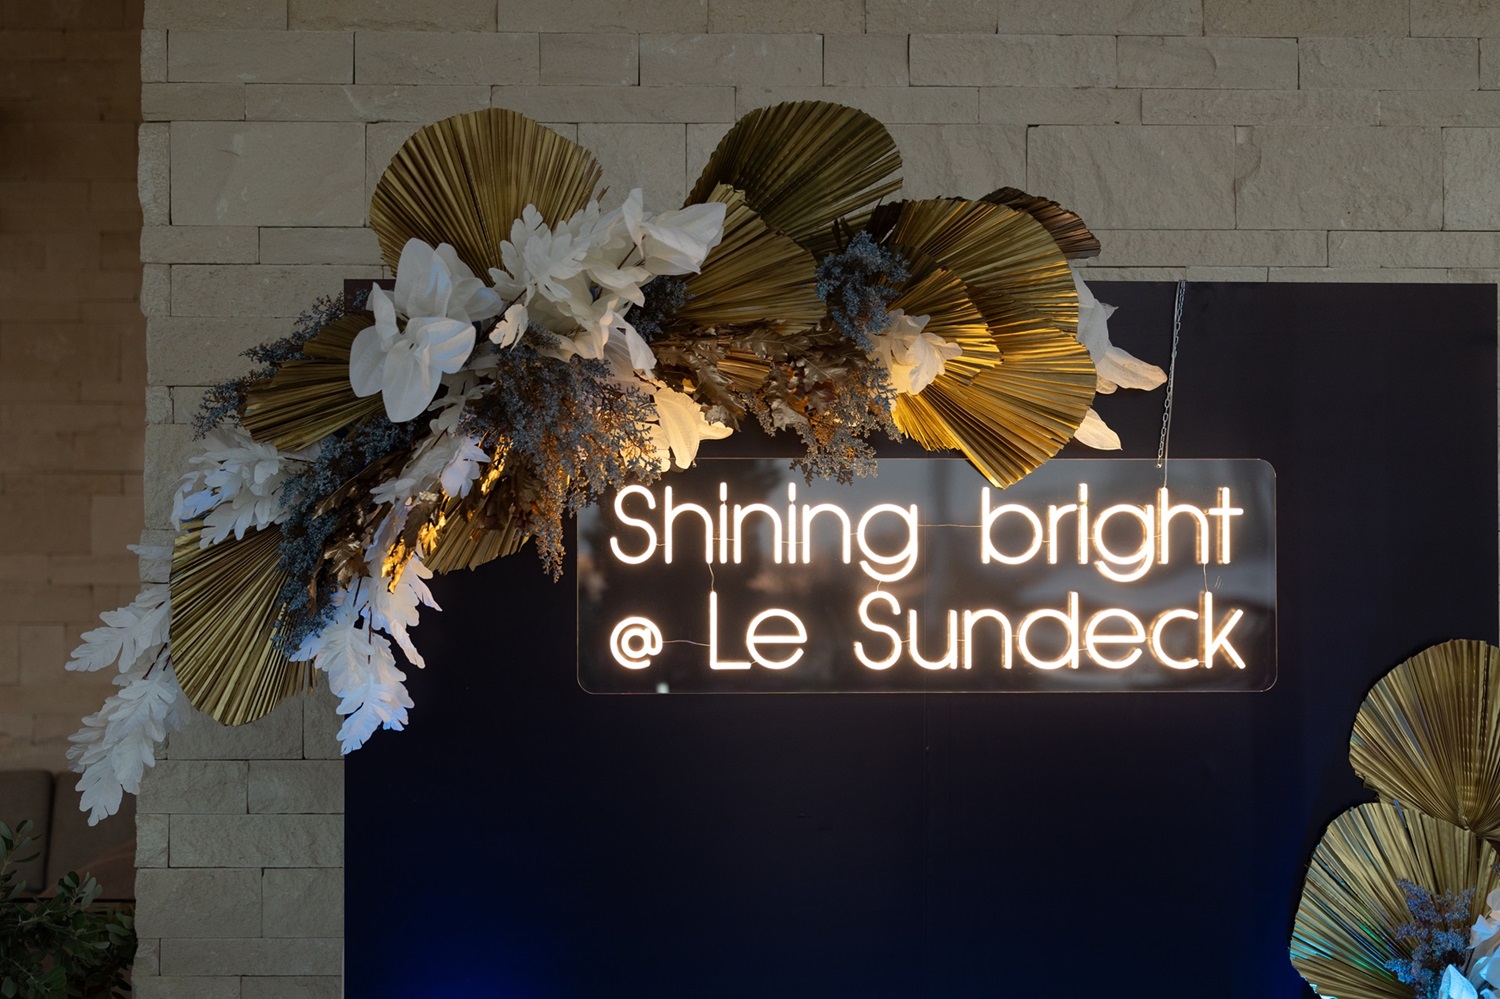 Le Sundeck Robuchon: Το εντυπωσιακό Grand Opening Summer Party